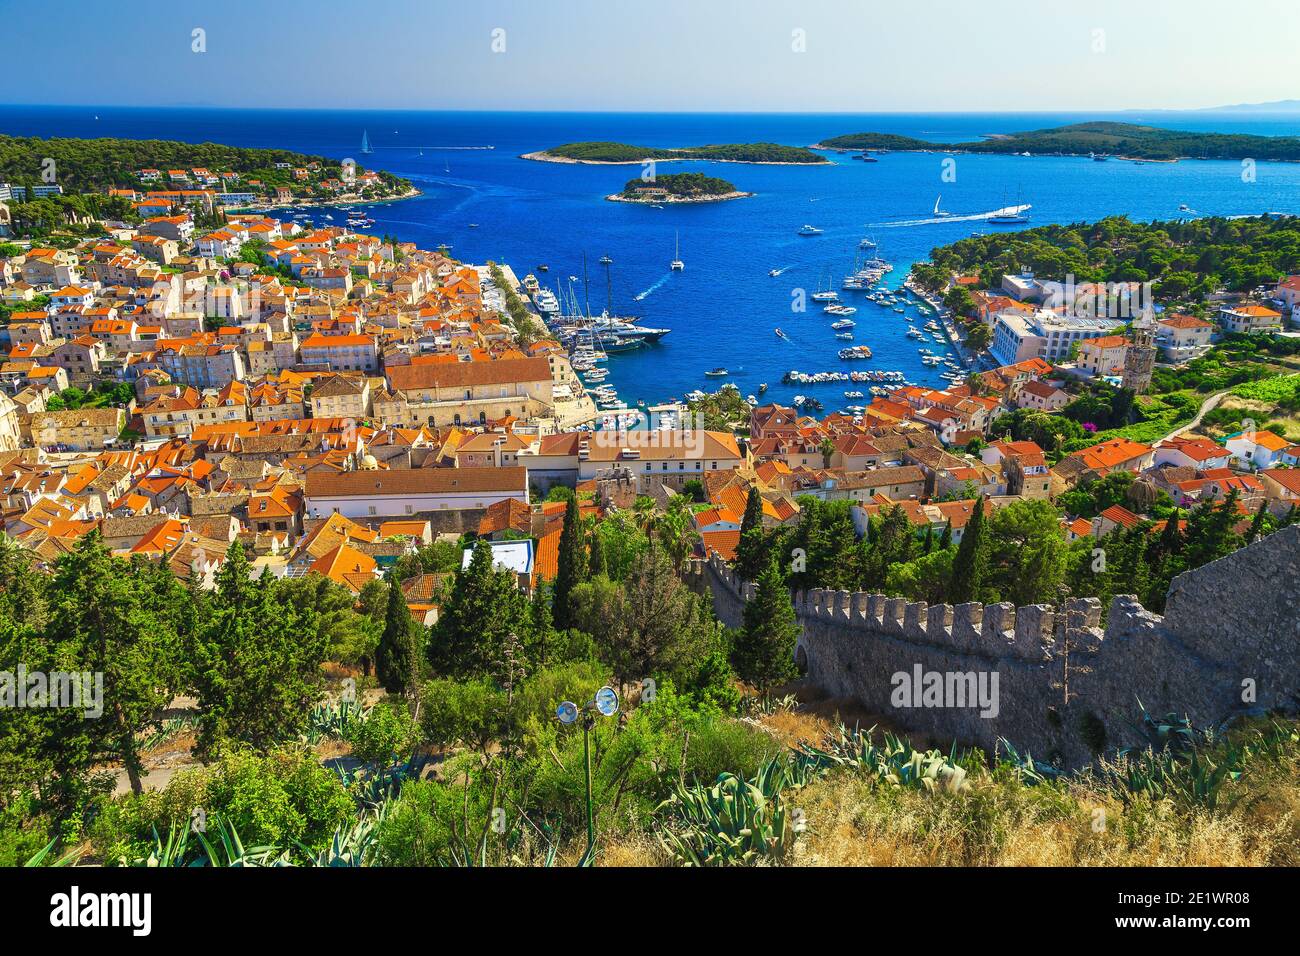 Amazing view from the Spanjola fortress garden with Hvar harbor and green islands in background, Hvar island, Dalmatia, Croatia, Europe Stock Photo